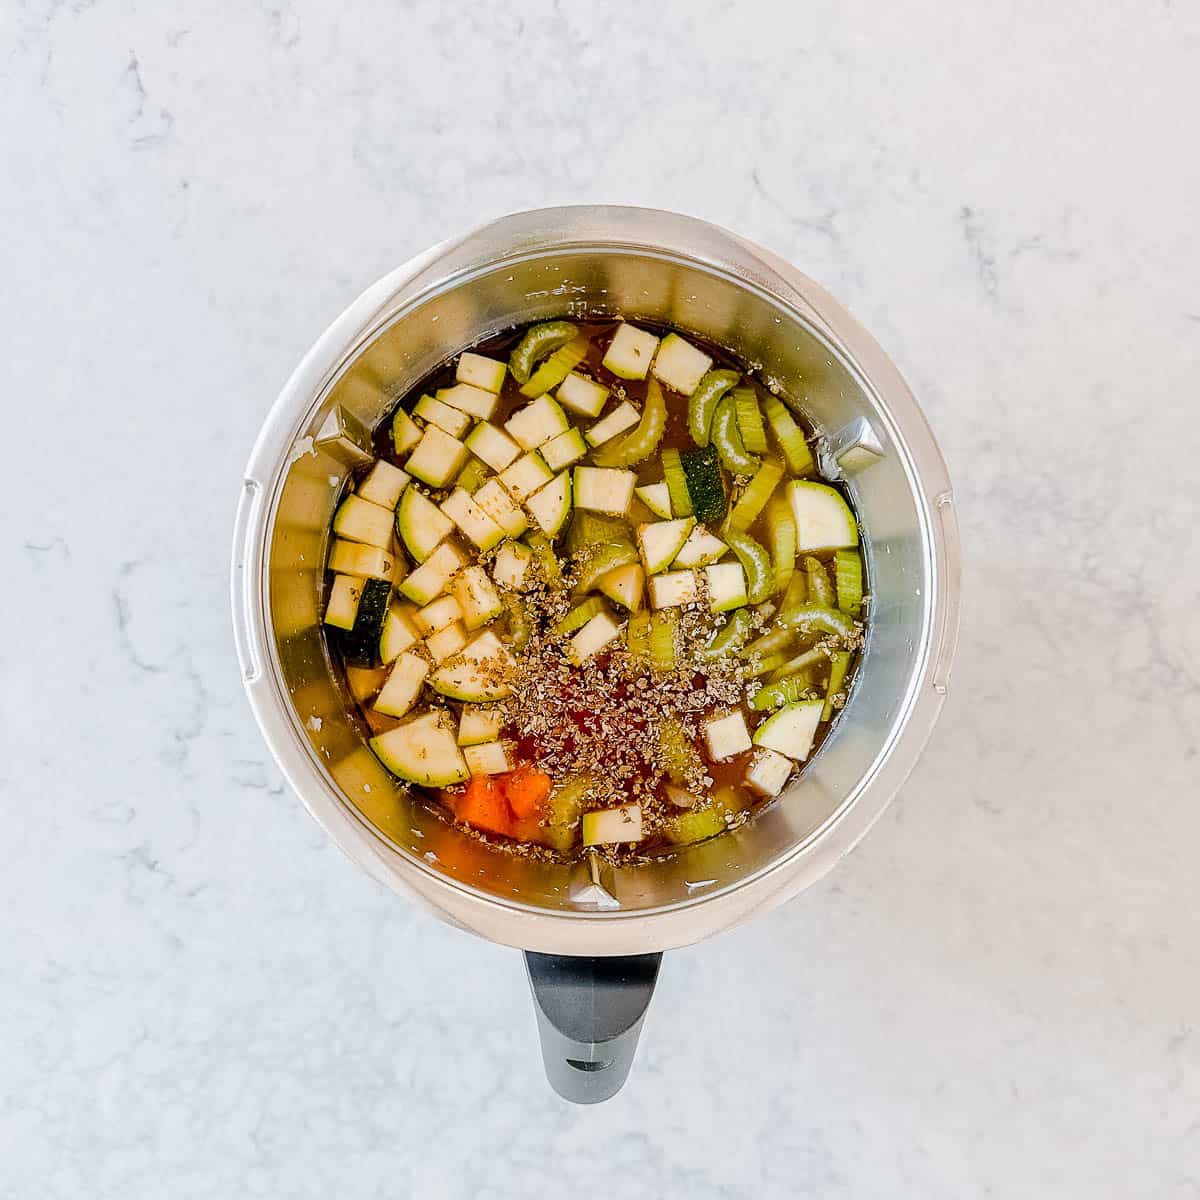 Mixed vegetables and stock in a Thermomix bowl.